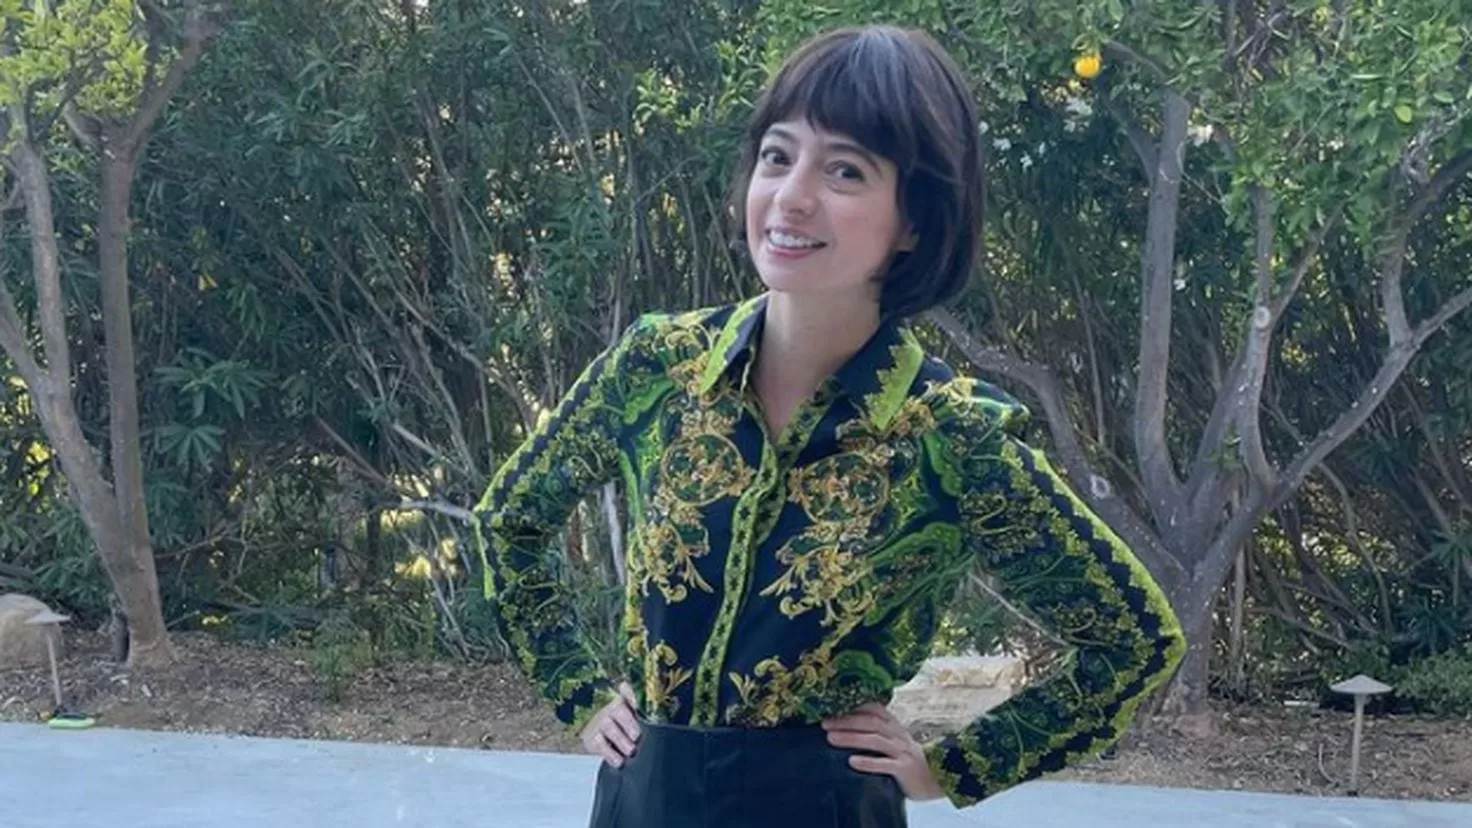 Actress Kate Micucci, from The Big Bang Theory, announces that she has cancer
